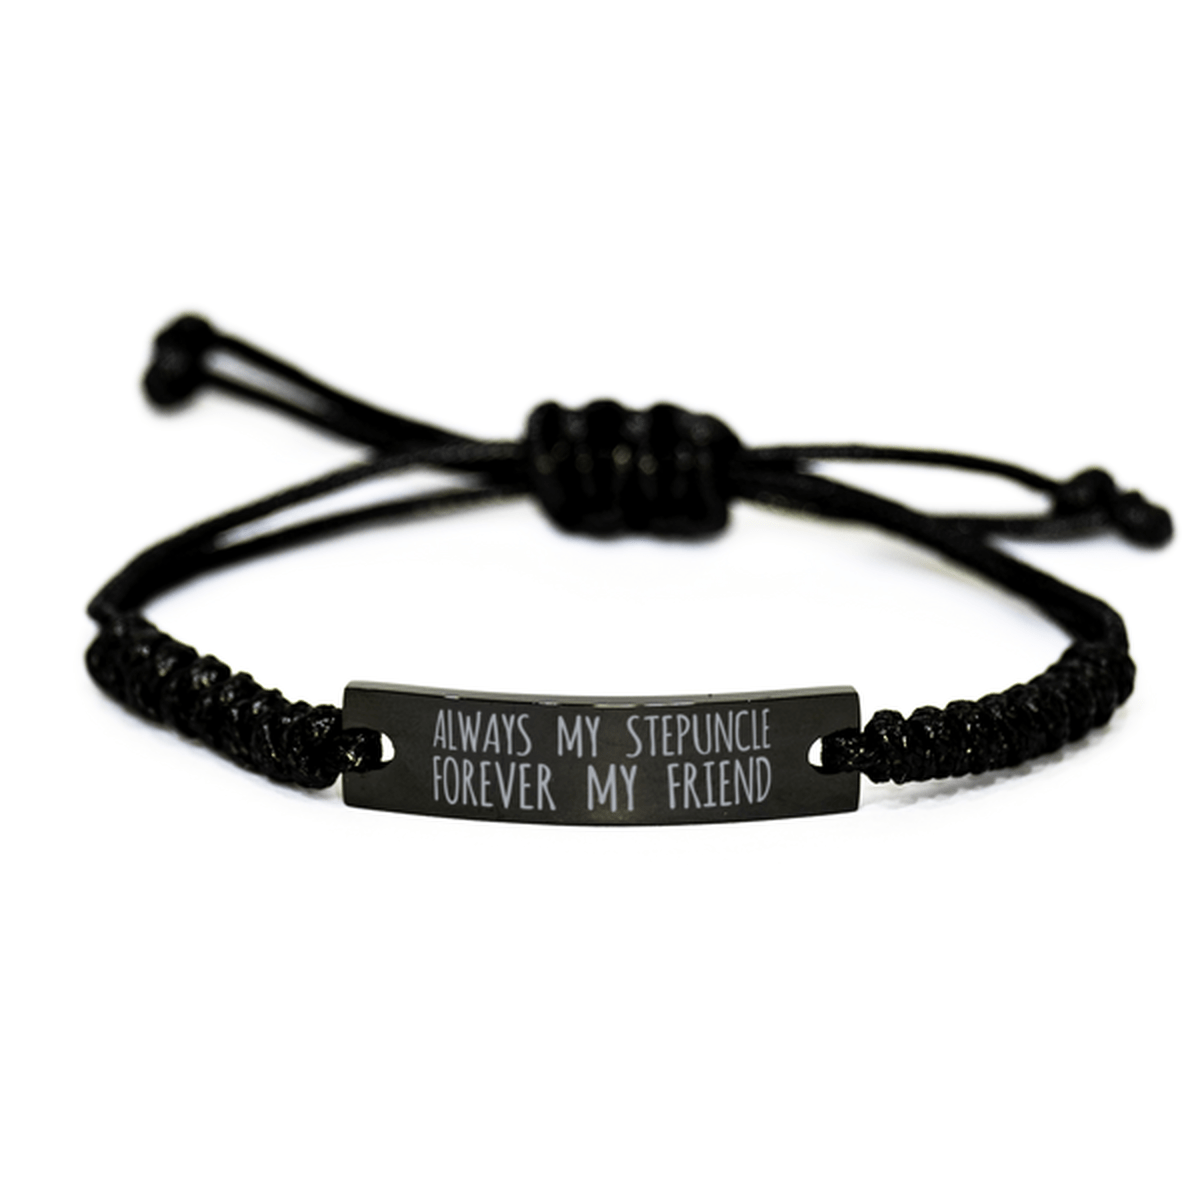 Inspirational Stepuncle Black Rope Bracelet, Always My Stepuncle Forever My Friend, Best Birthday Gifts For Family